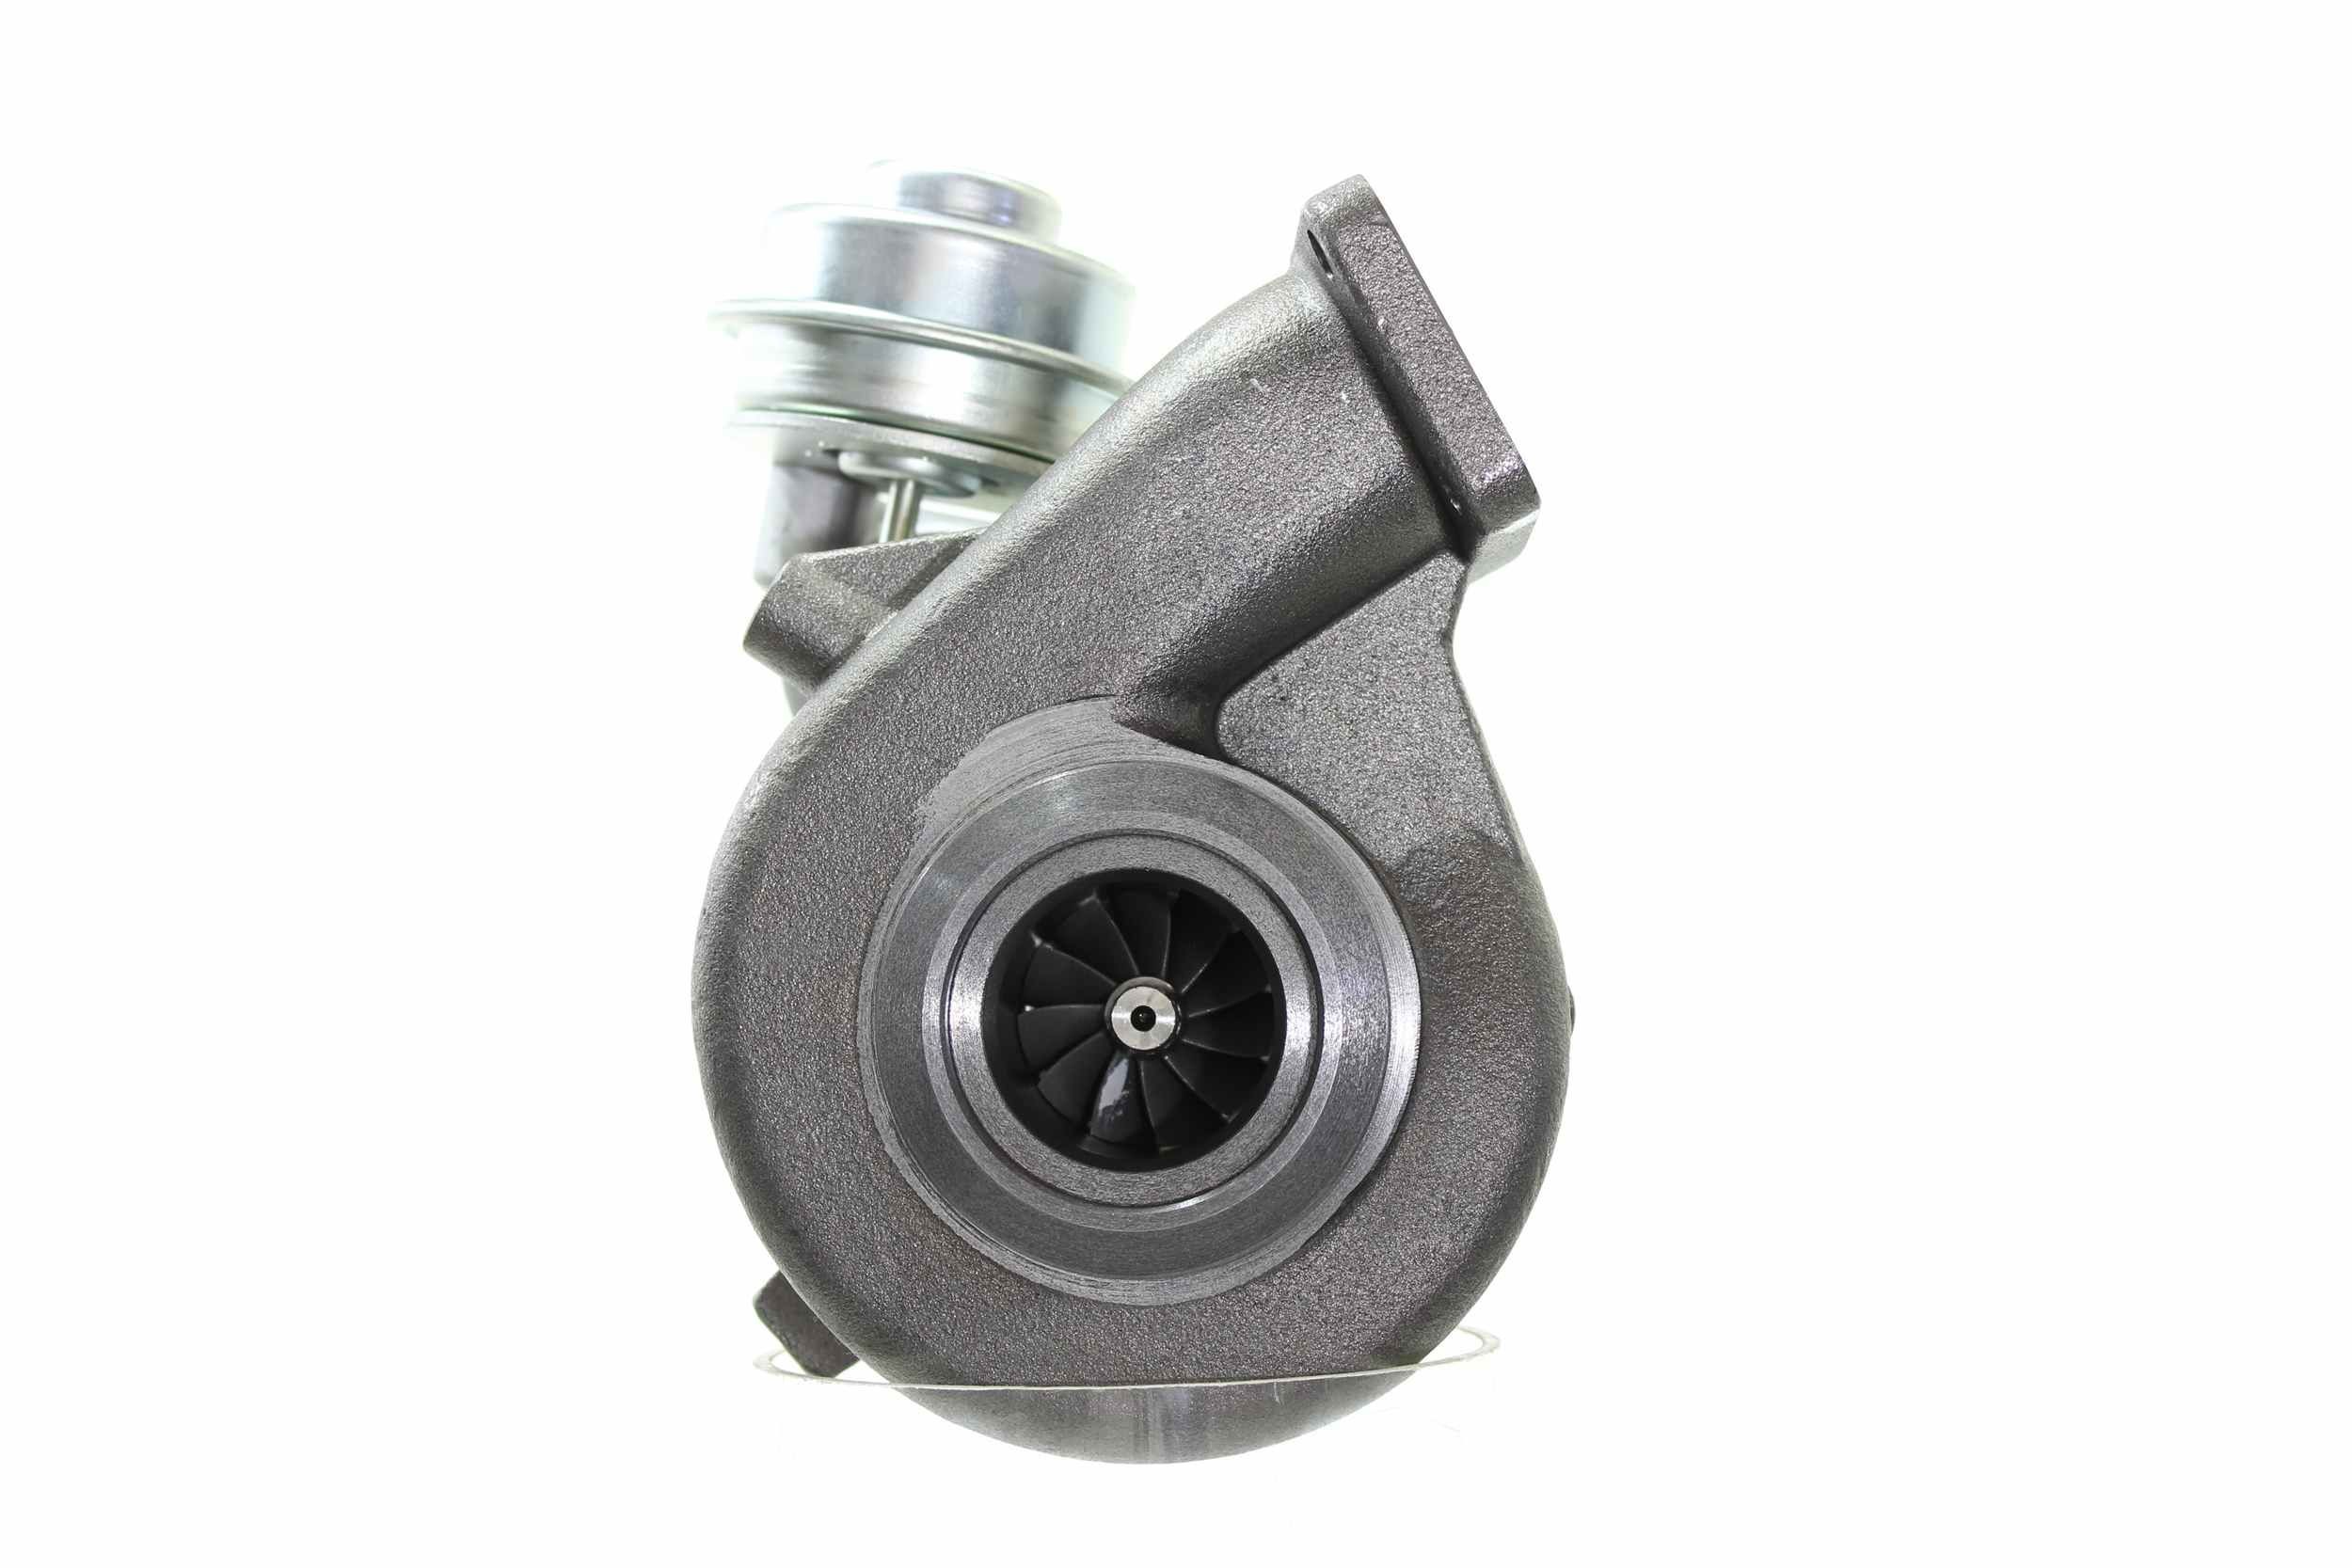 ALANKO 900785 Turbo Exhaust Turbocharger, Incl. Gasket Set, with attachment material